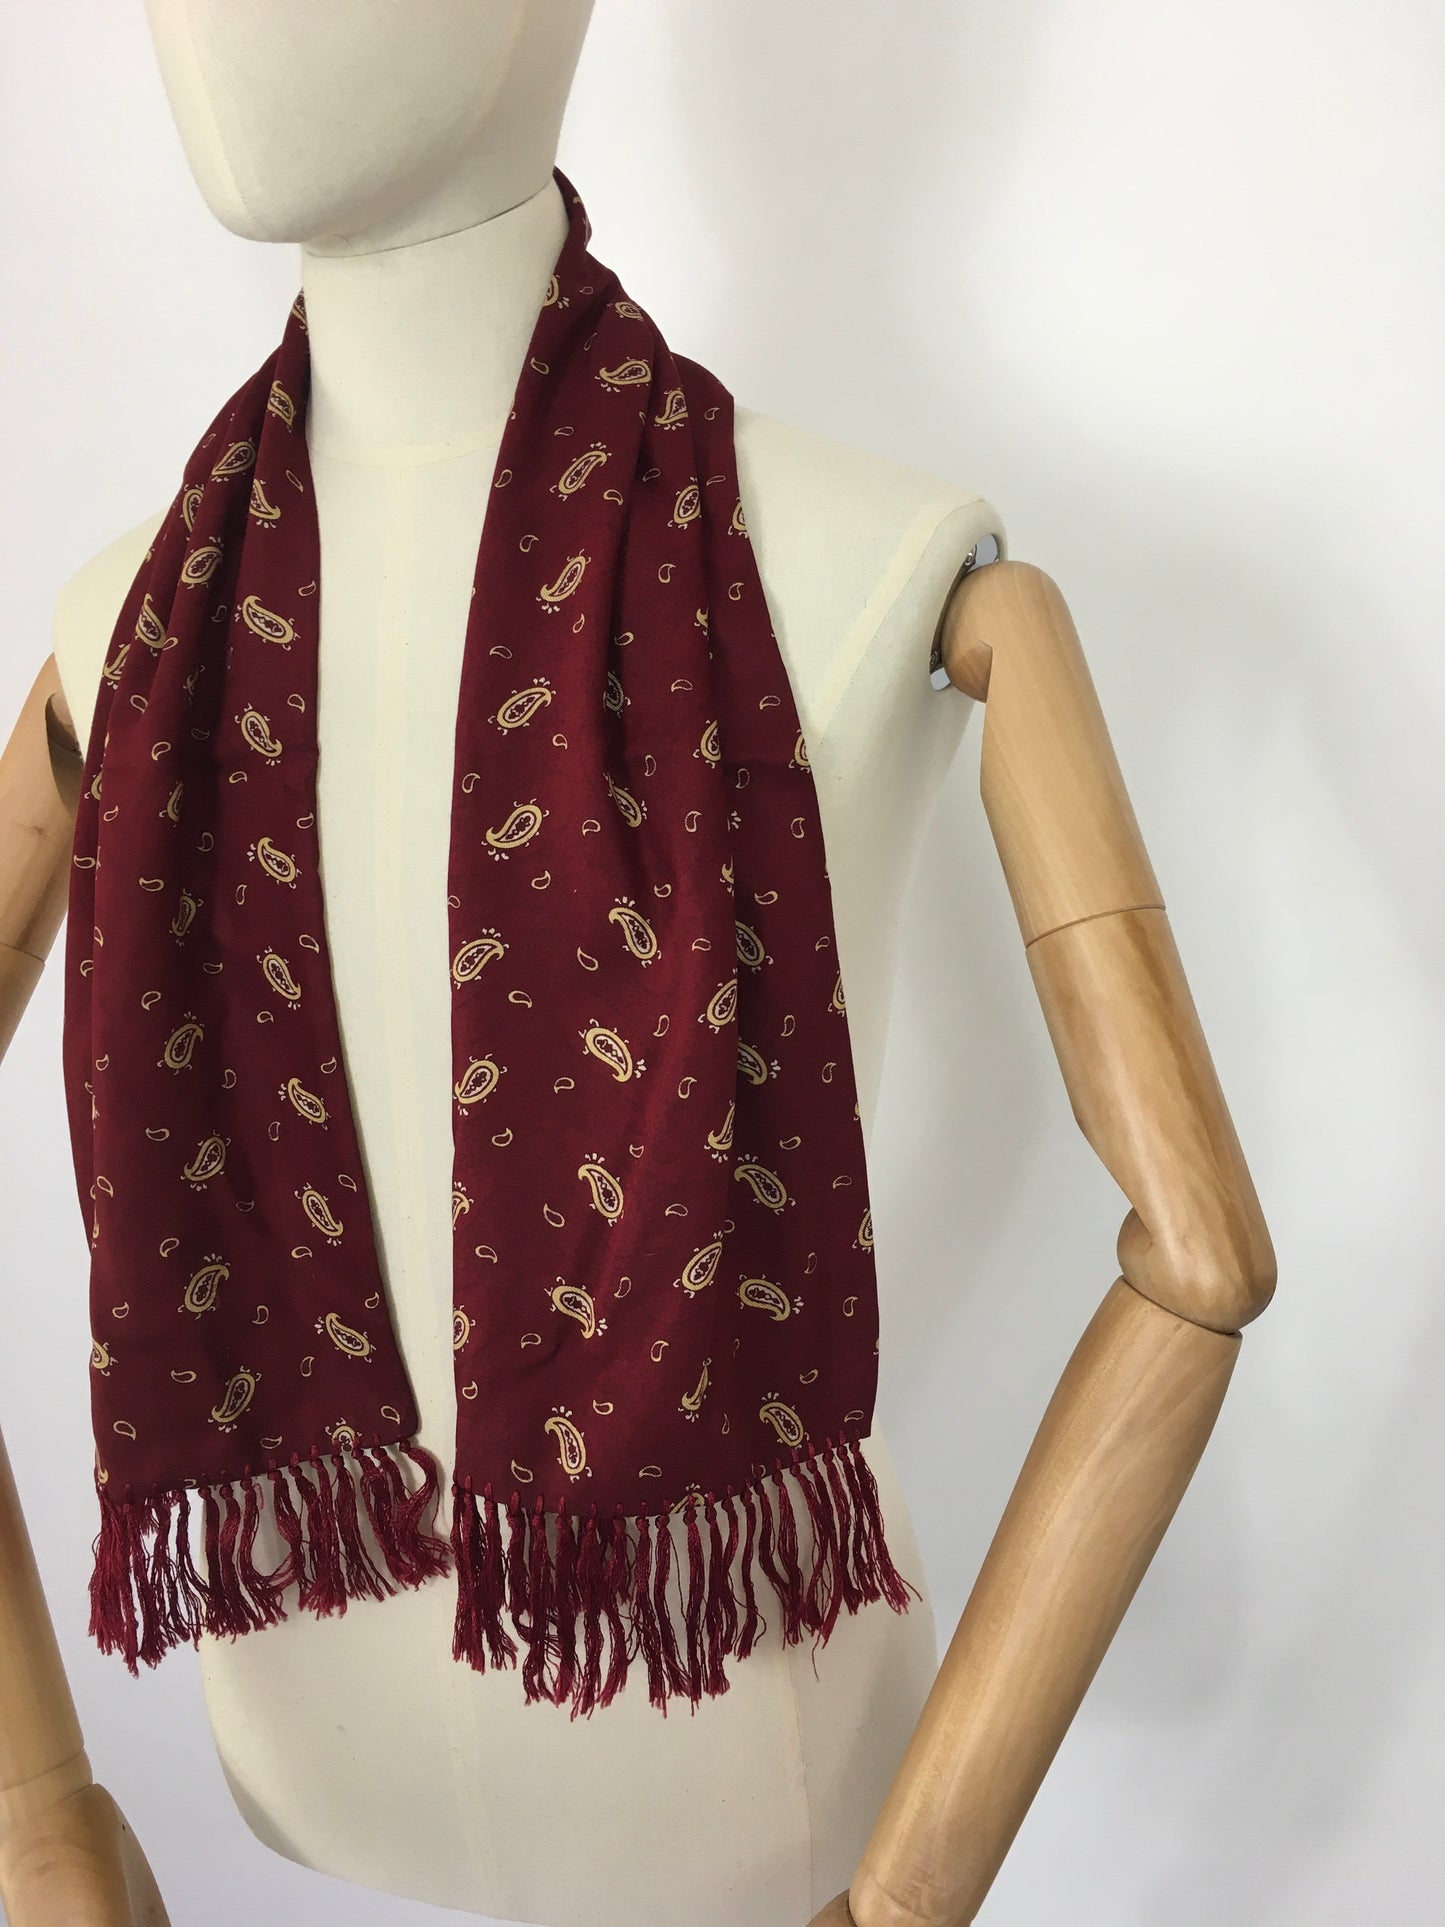 Original 1940’s Mens Scarf - In a Lovely Burgundy, Yellow & Black Paisley Print